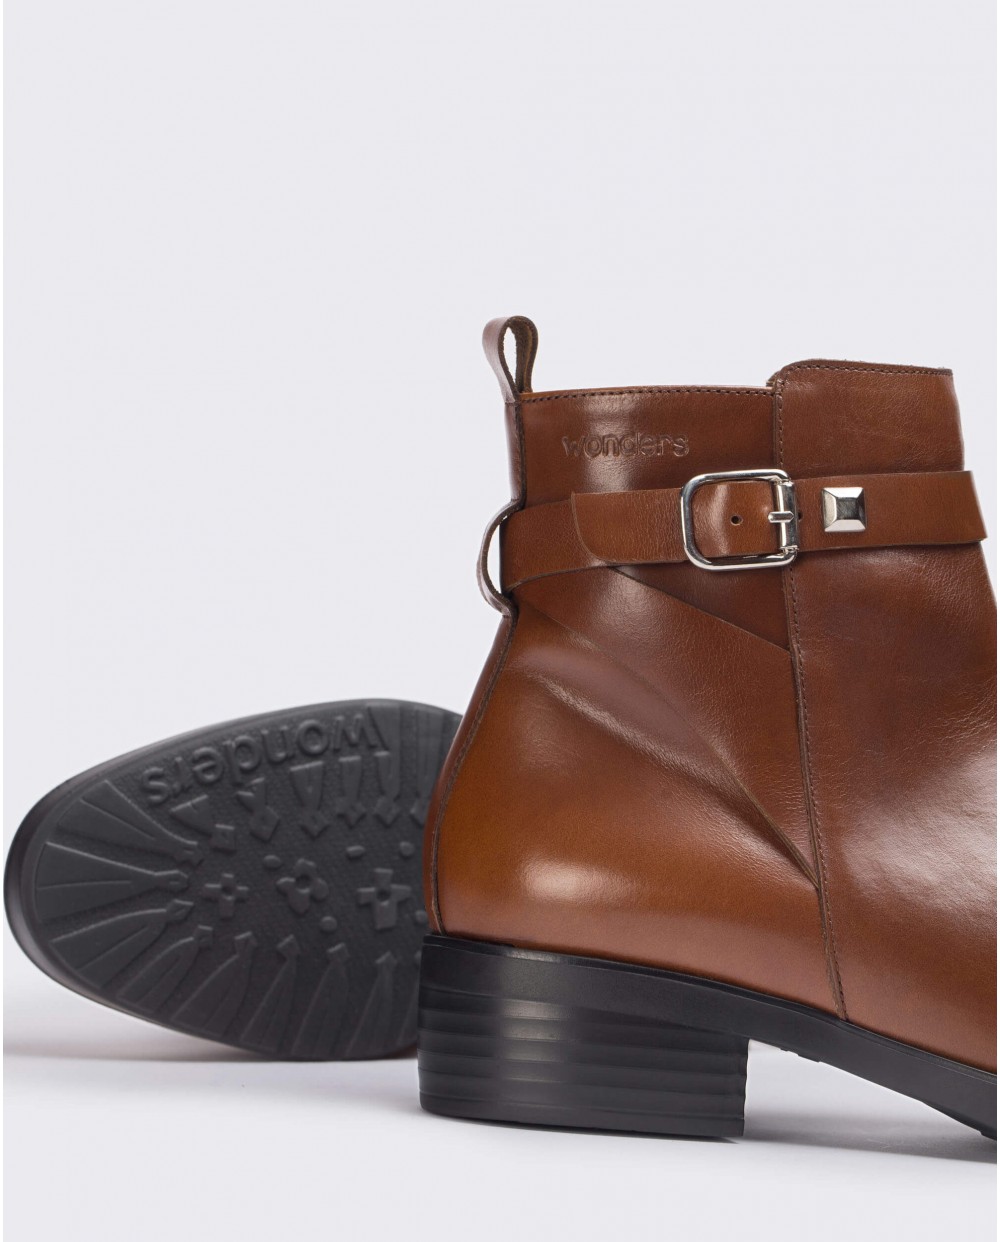 Wonders-Ankle Boots-Cognac Dai Ankle Boot